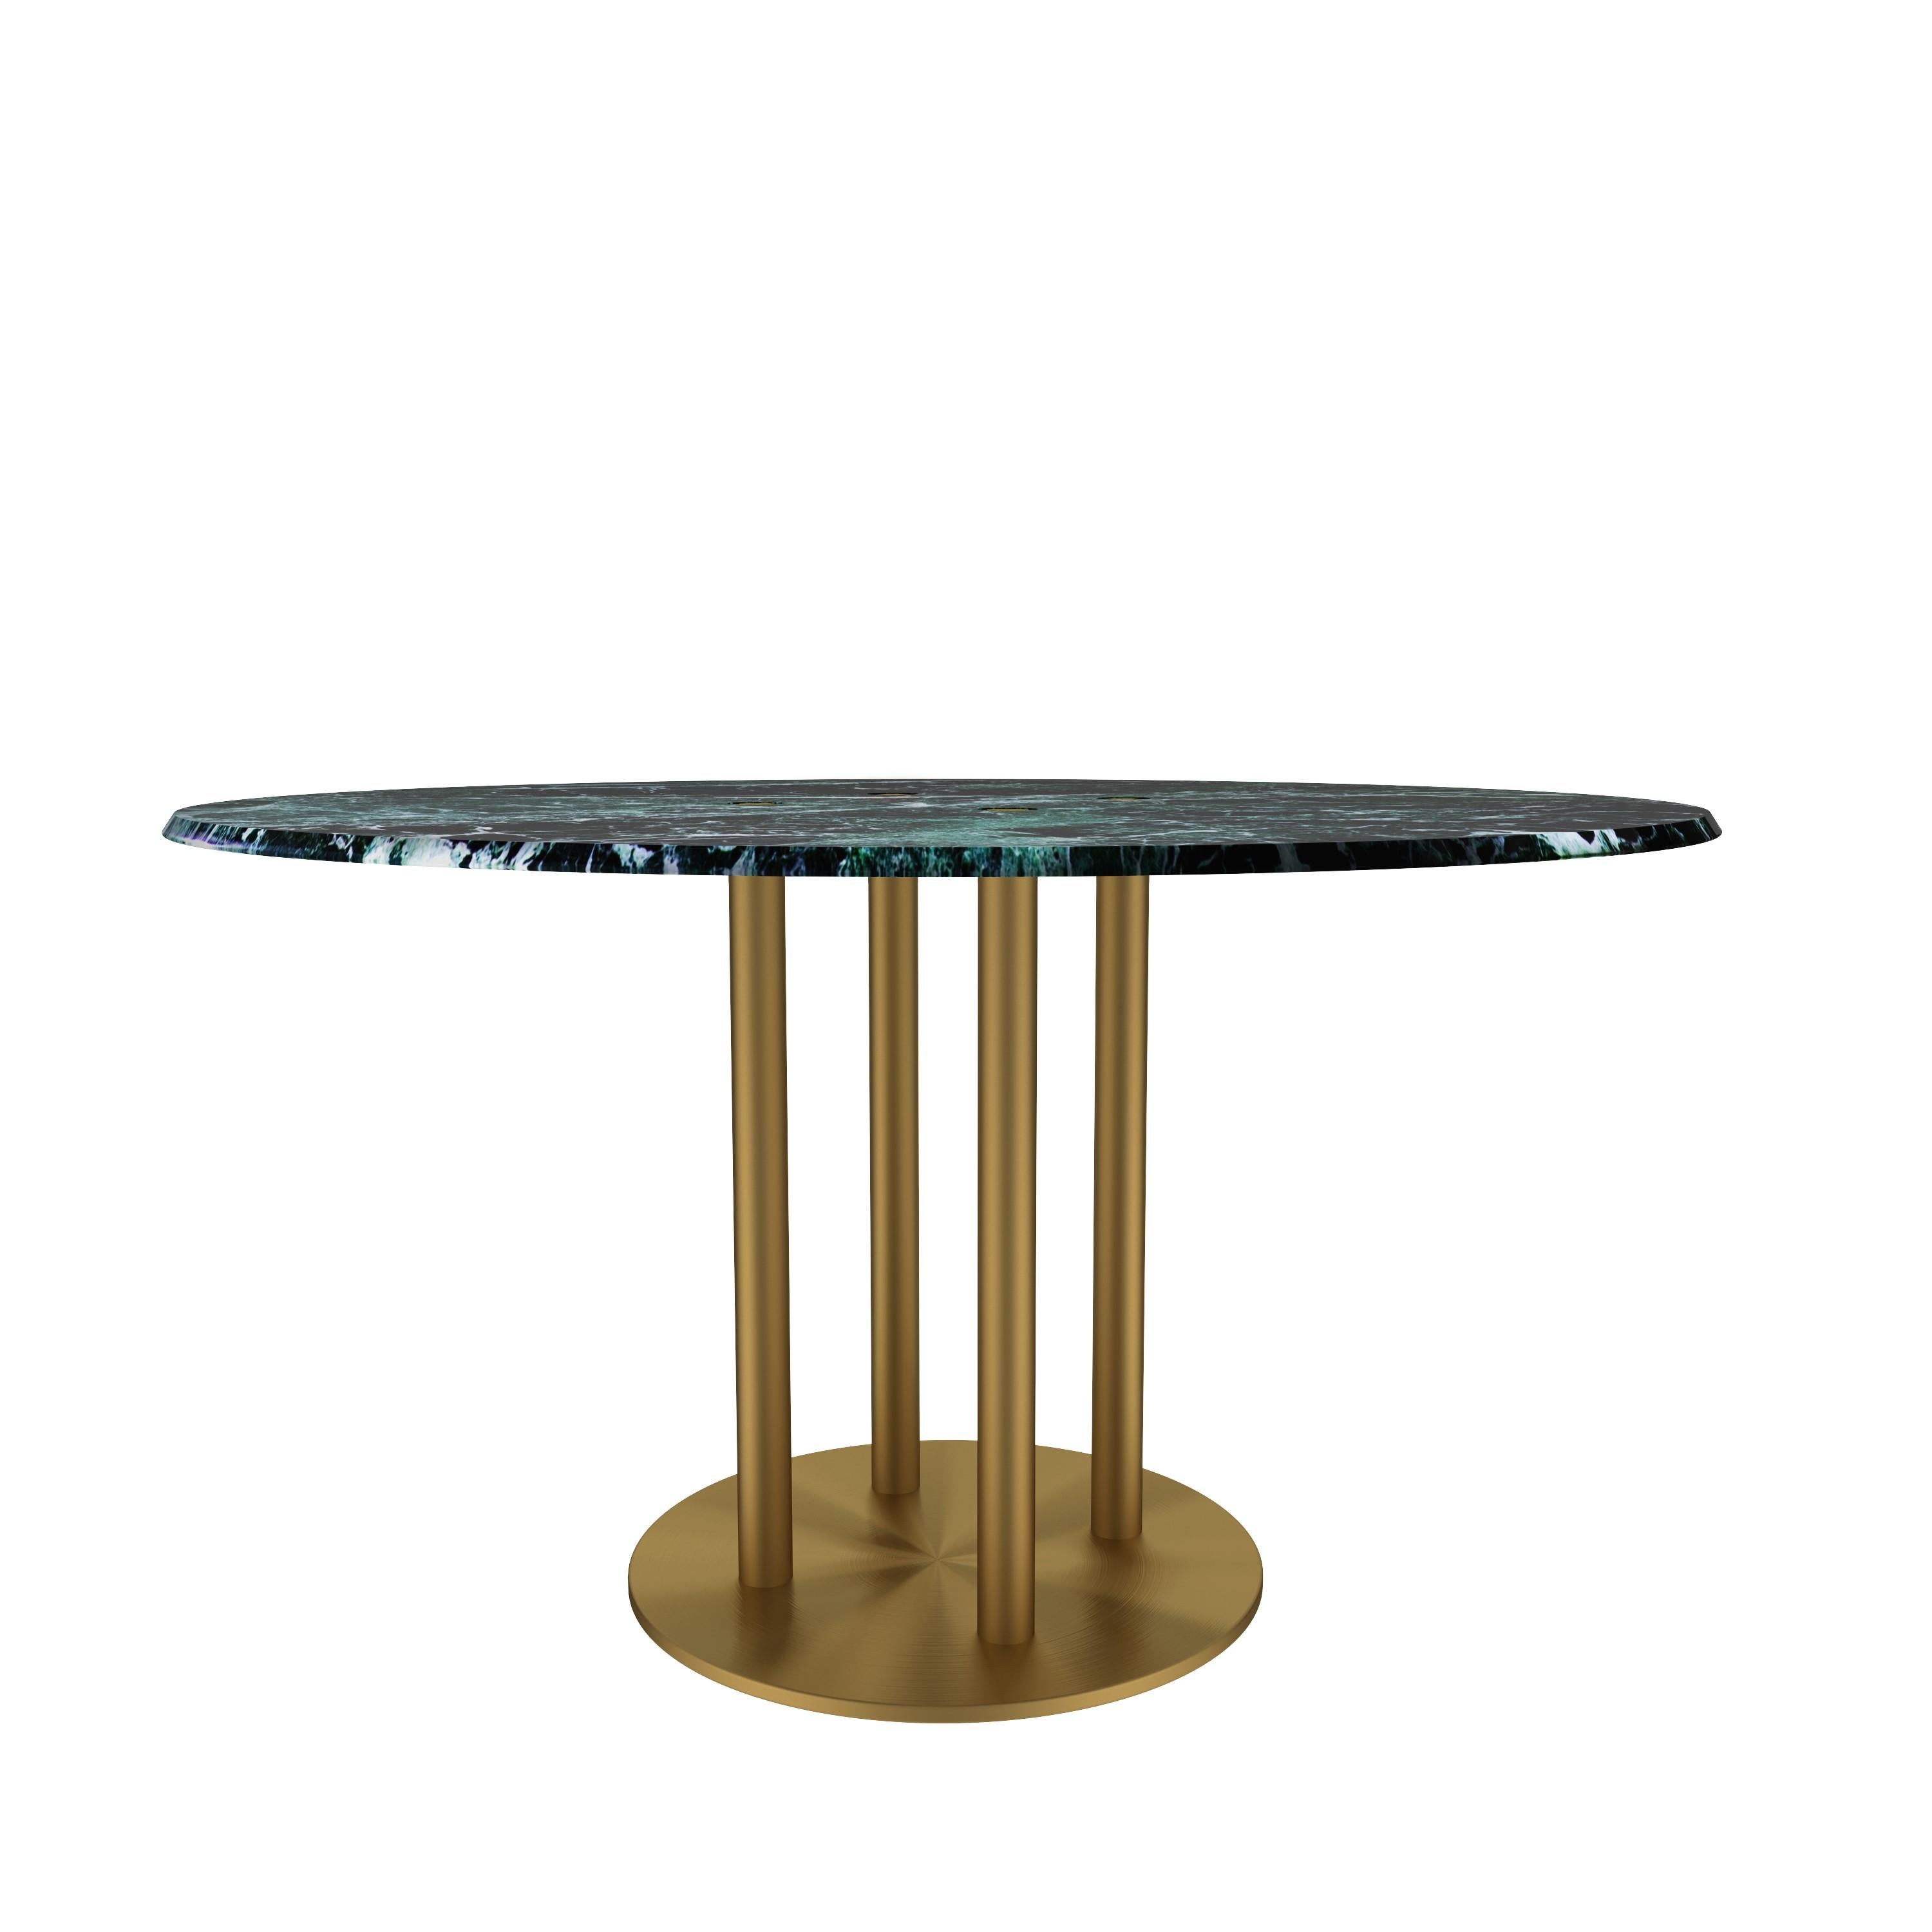 𝗣𝗿𝗼𝗱𝘂𝗰𝘁 𝗗𝗲𝘁𝗮𝗶𝗹𝘀:
NORDST Lot Dining Table is a masterpiece of Italian Green Marble, marking a new era in modern dining tables with its Danish Modern Design. This addition to the Holy Marble collection is not just a dining table; it's a